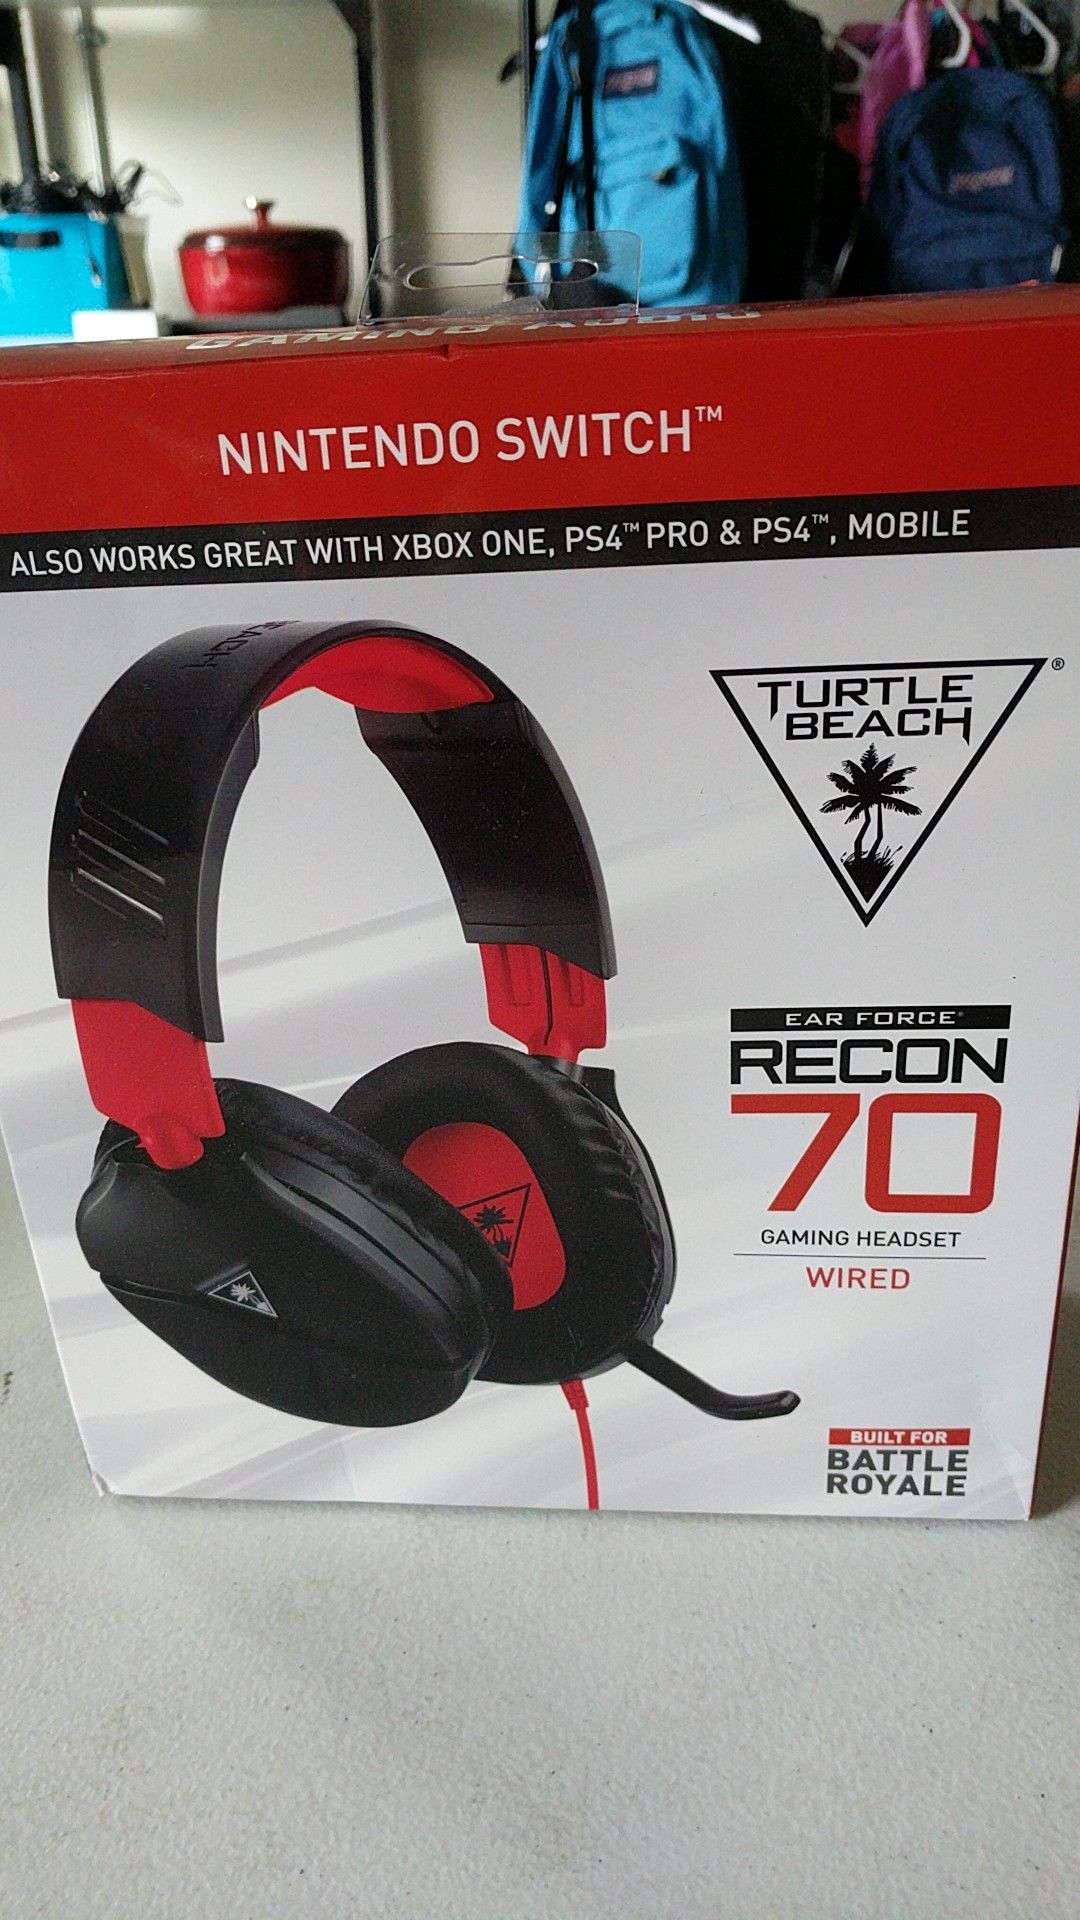 Turtle Beach gaming headset wired